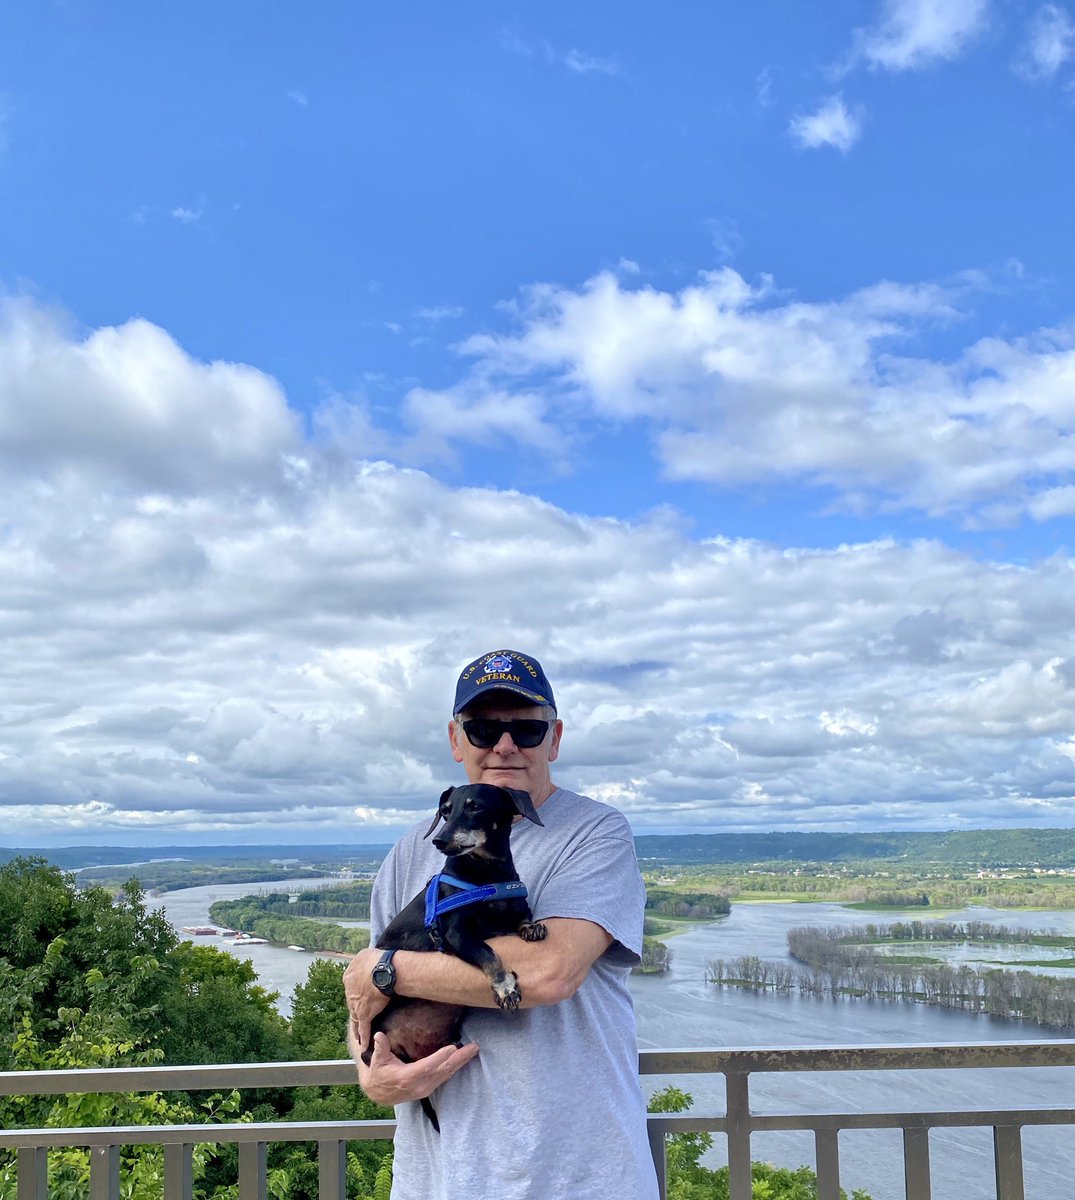 Staying 2 days at Pikes Peak State Park in NE Iowa at confluence of MS & WI Rivers. Very beautiful flyover country. No masks anywhere here. Fresh air and nature, perfect anecdote to the China Virus. Pics: Barney&Dad+River 